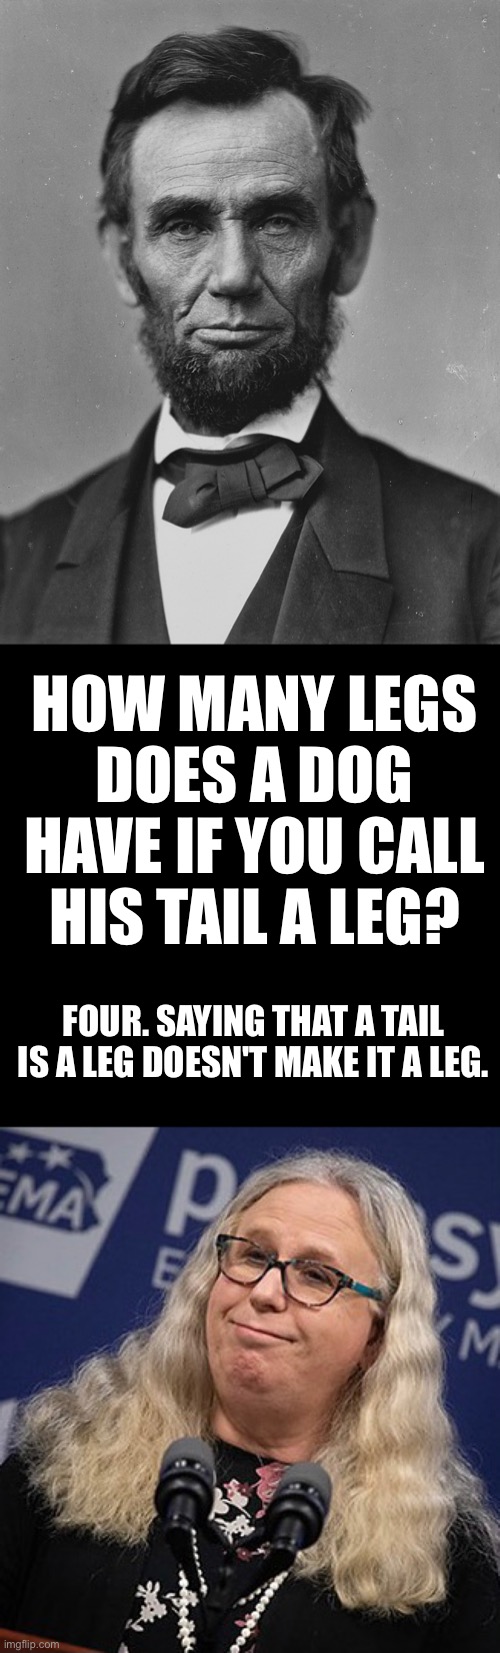 Actual quote by Abraham Lincoln... | HOW MANY LEGS DOES A DOG HAVE IF YOU CALL HIS TAIL A LEG? FOUR. SAYING THAT A TAIL IS A LEG DOESN'T MAKE IT A LEG. | image tagged in abraham lincoln,saying that a tail is a leg does not make it a leg | made w/ Imgflip meme maker